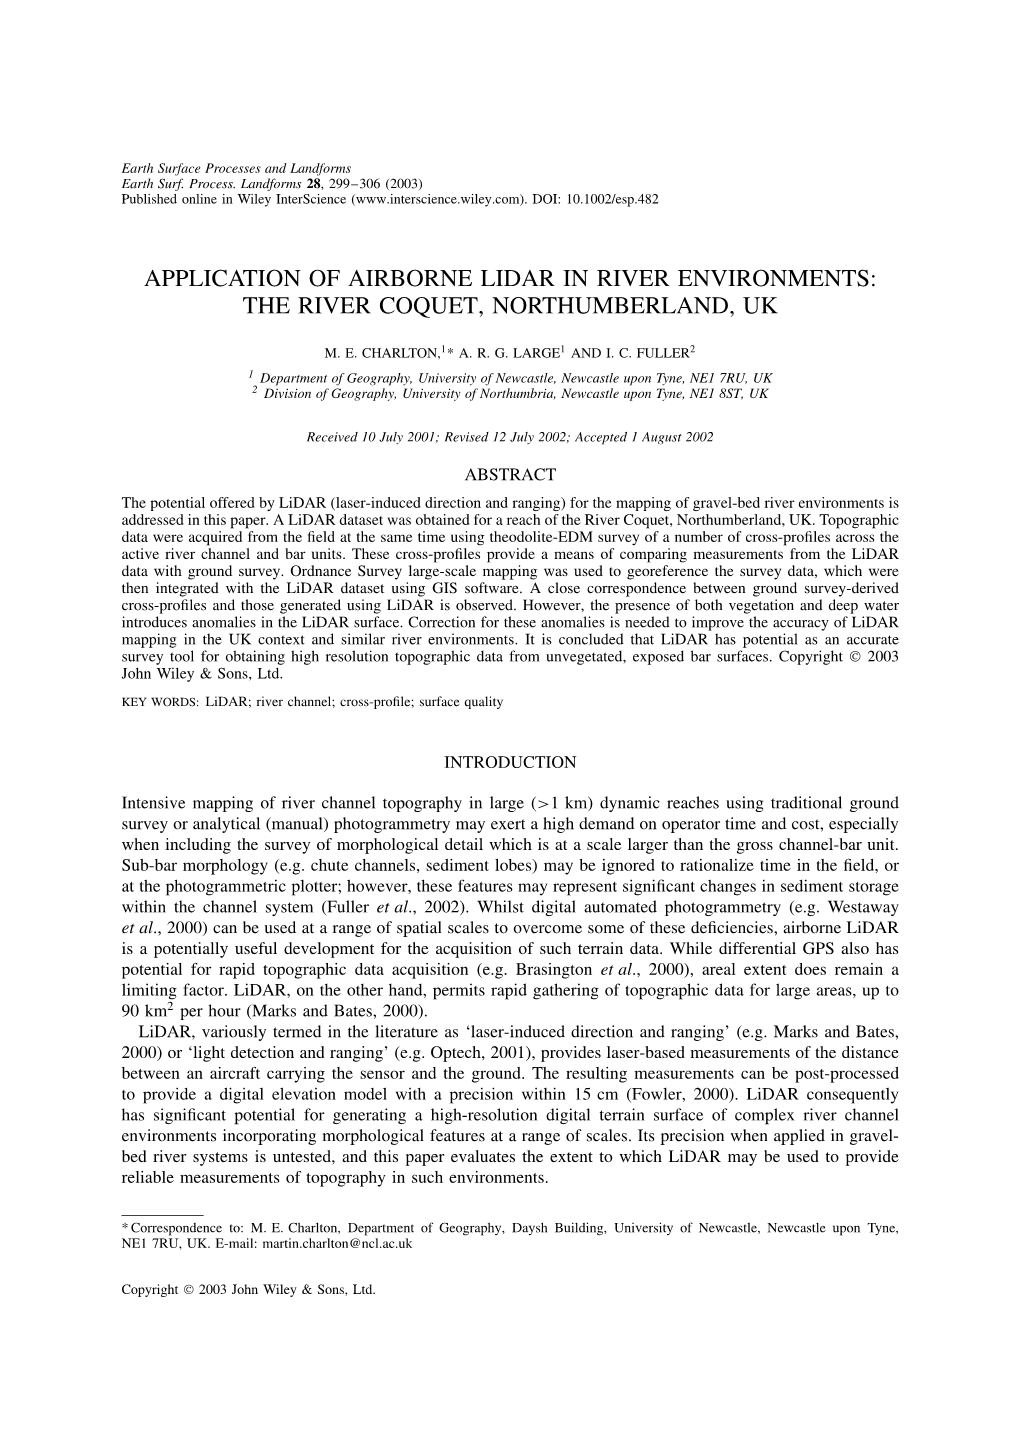 Application of Airborne Lidar in River Environments: the River Coquet, Northumberland, Uk